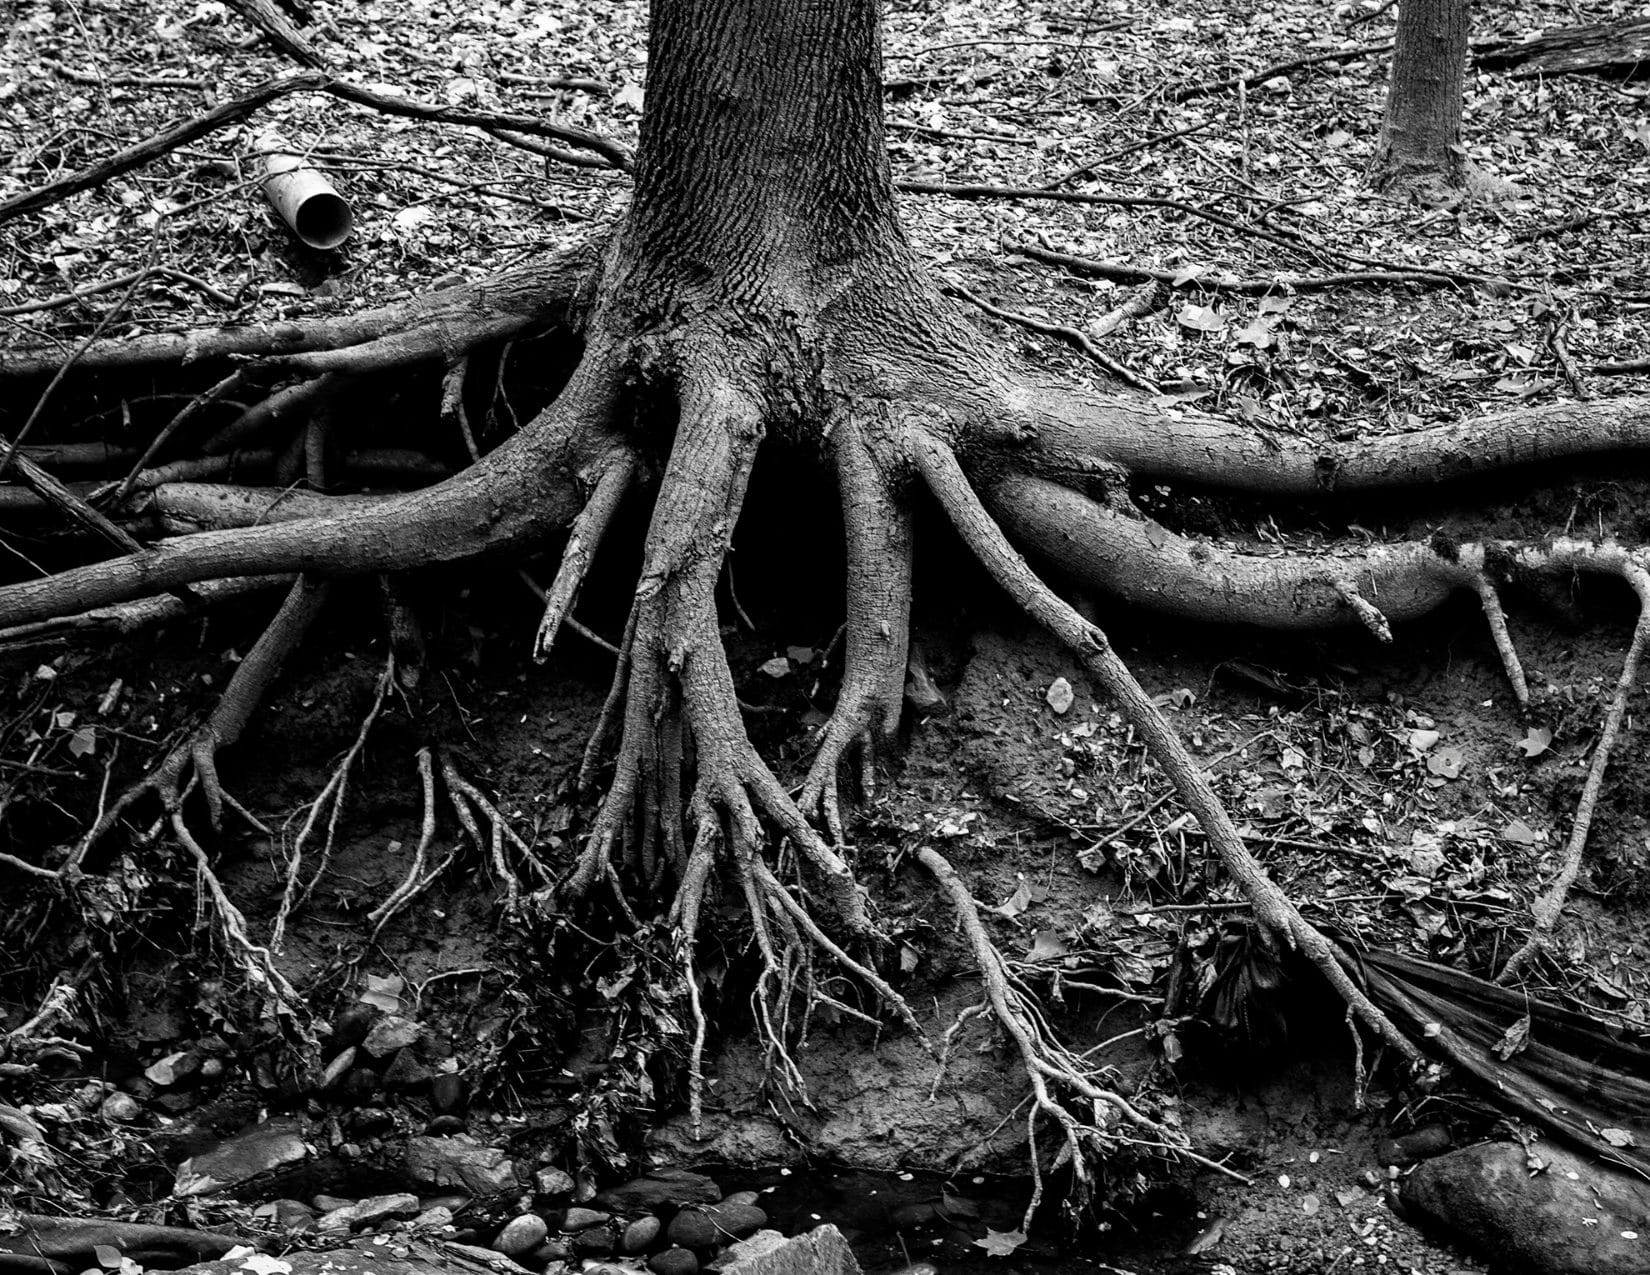 Black and white image of tree roots